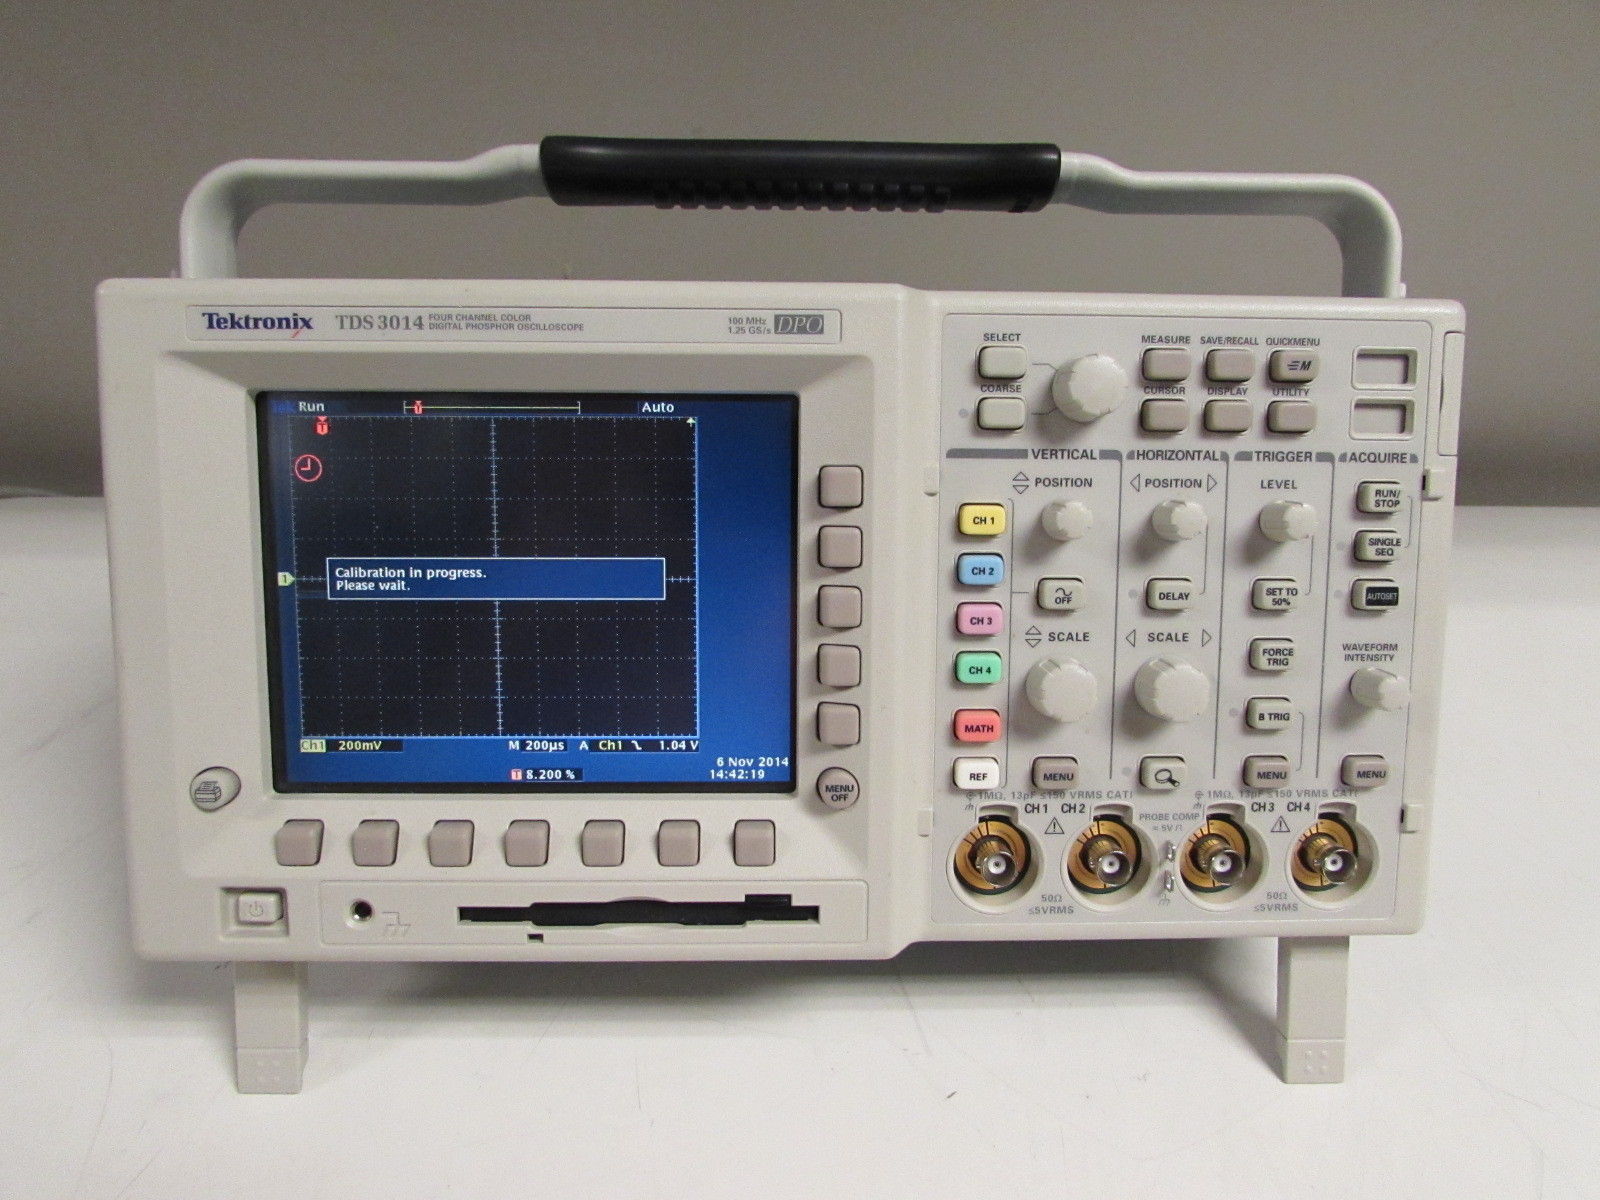 TEKTRONIX TDS 3014 Used for sale price #9093670, > buy from CAE